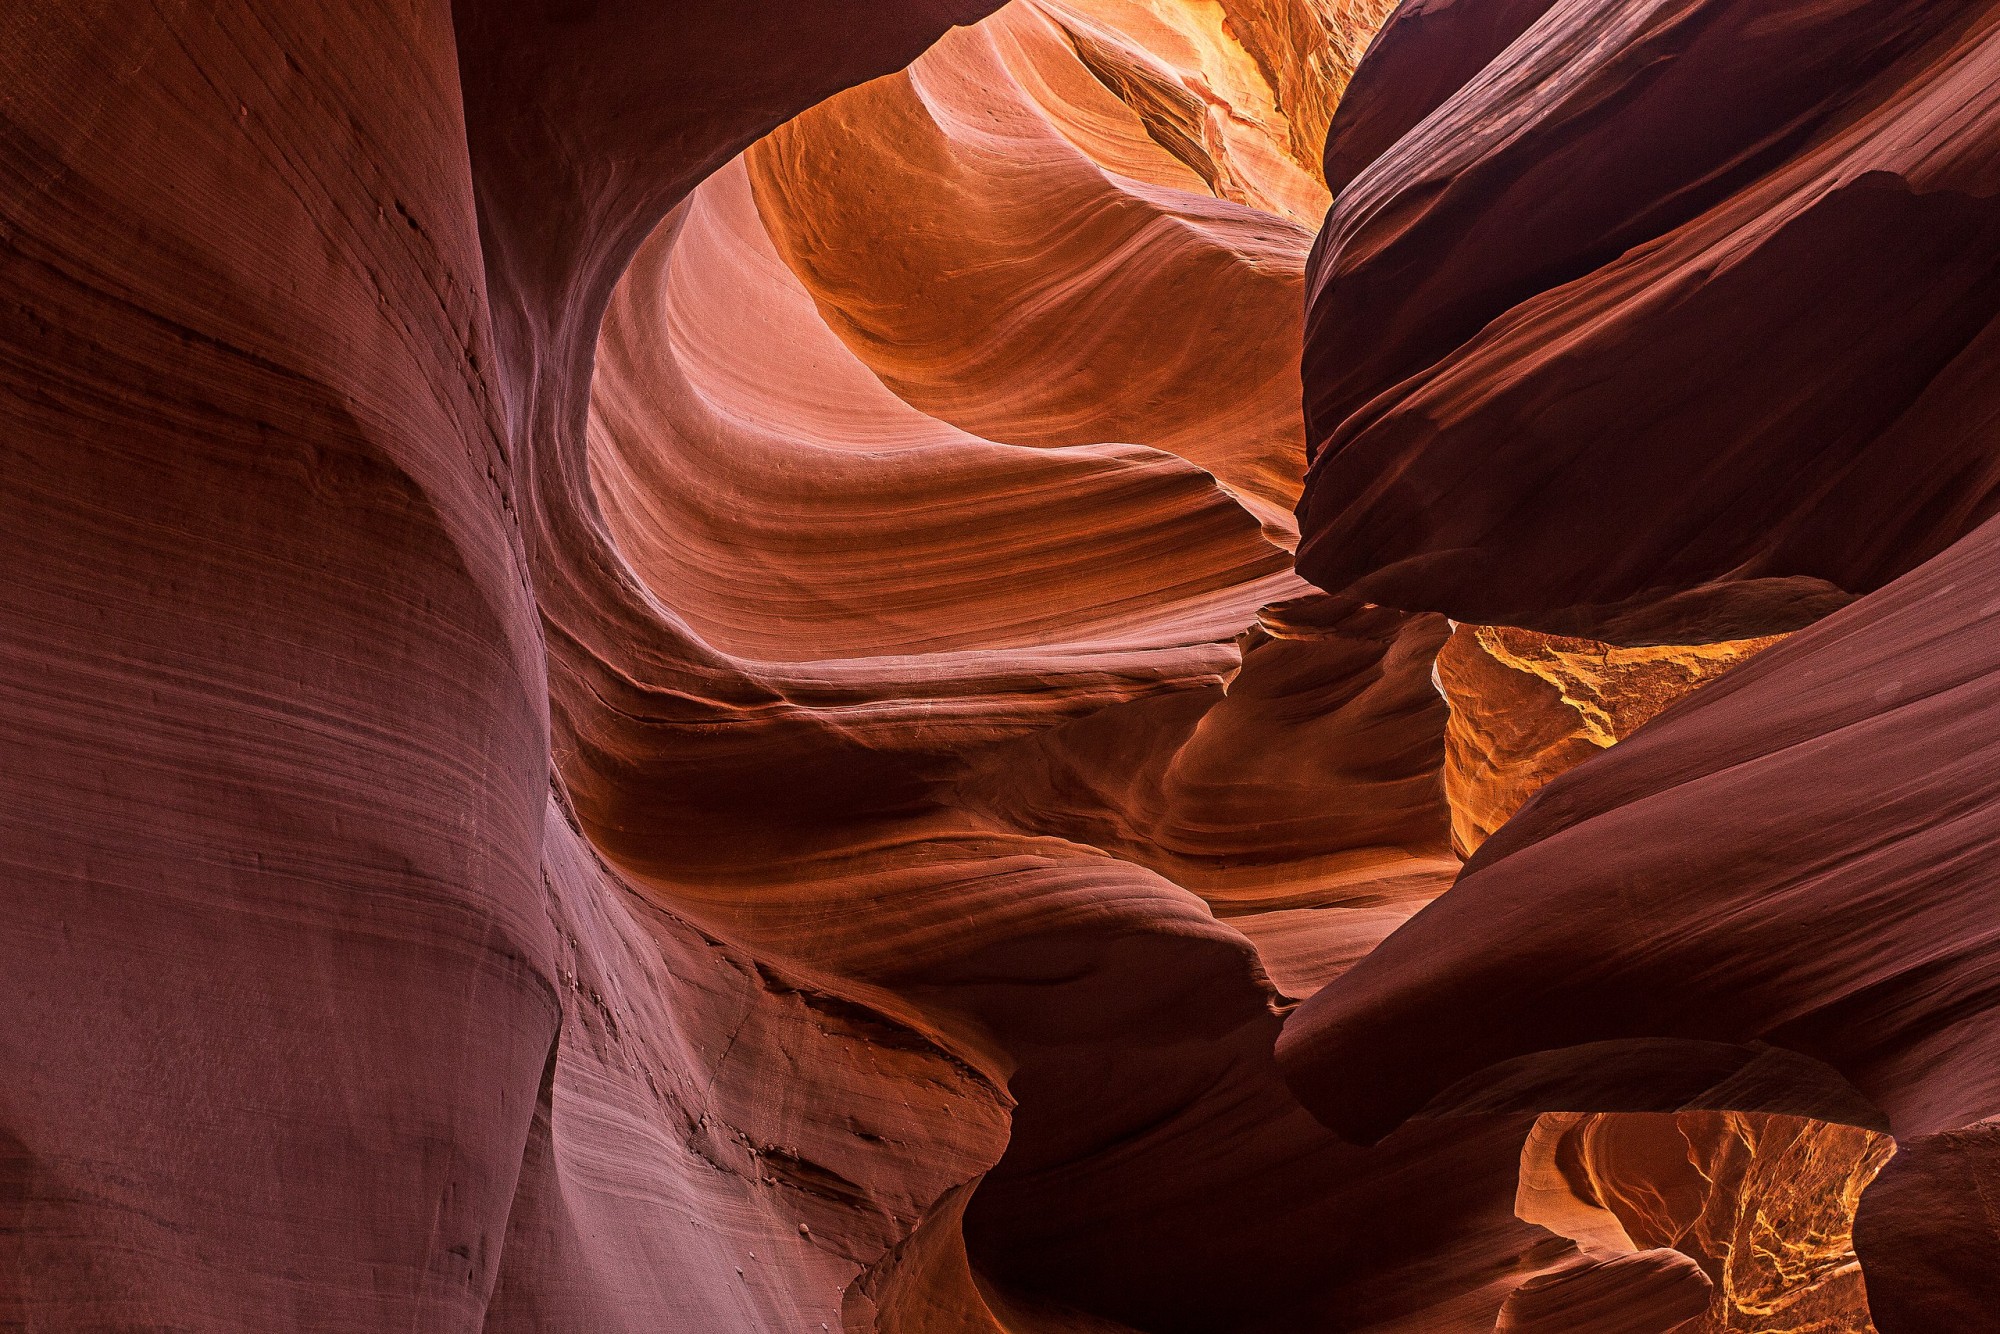 Despite its beauty, Antelope Canyon is not without its dangers. The canyon's geography causes flash floods that pose a threat to unsuspecting visitors. In 1997, tragedy struck when eleven people lost their lives to a sudden surge of water. Since then, strict safety measures have been implemented to ensure the well-being of all who venture into the canyon's depths.